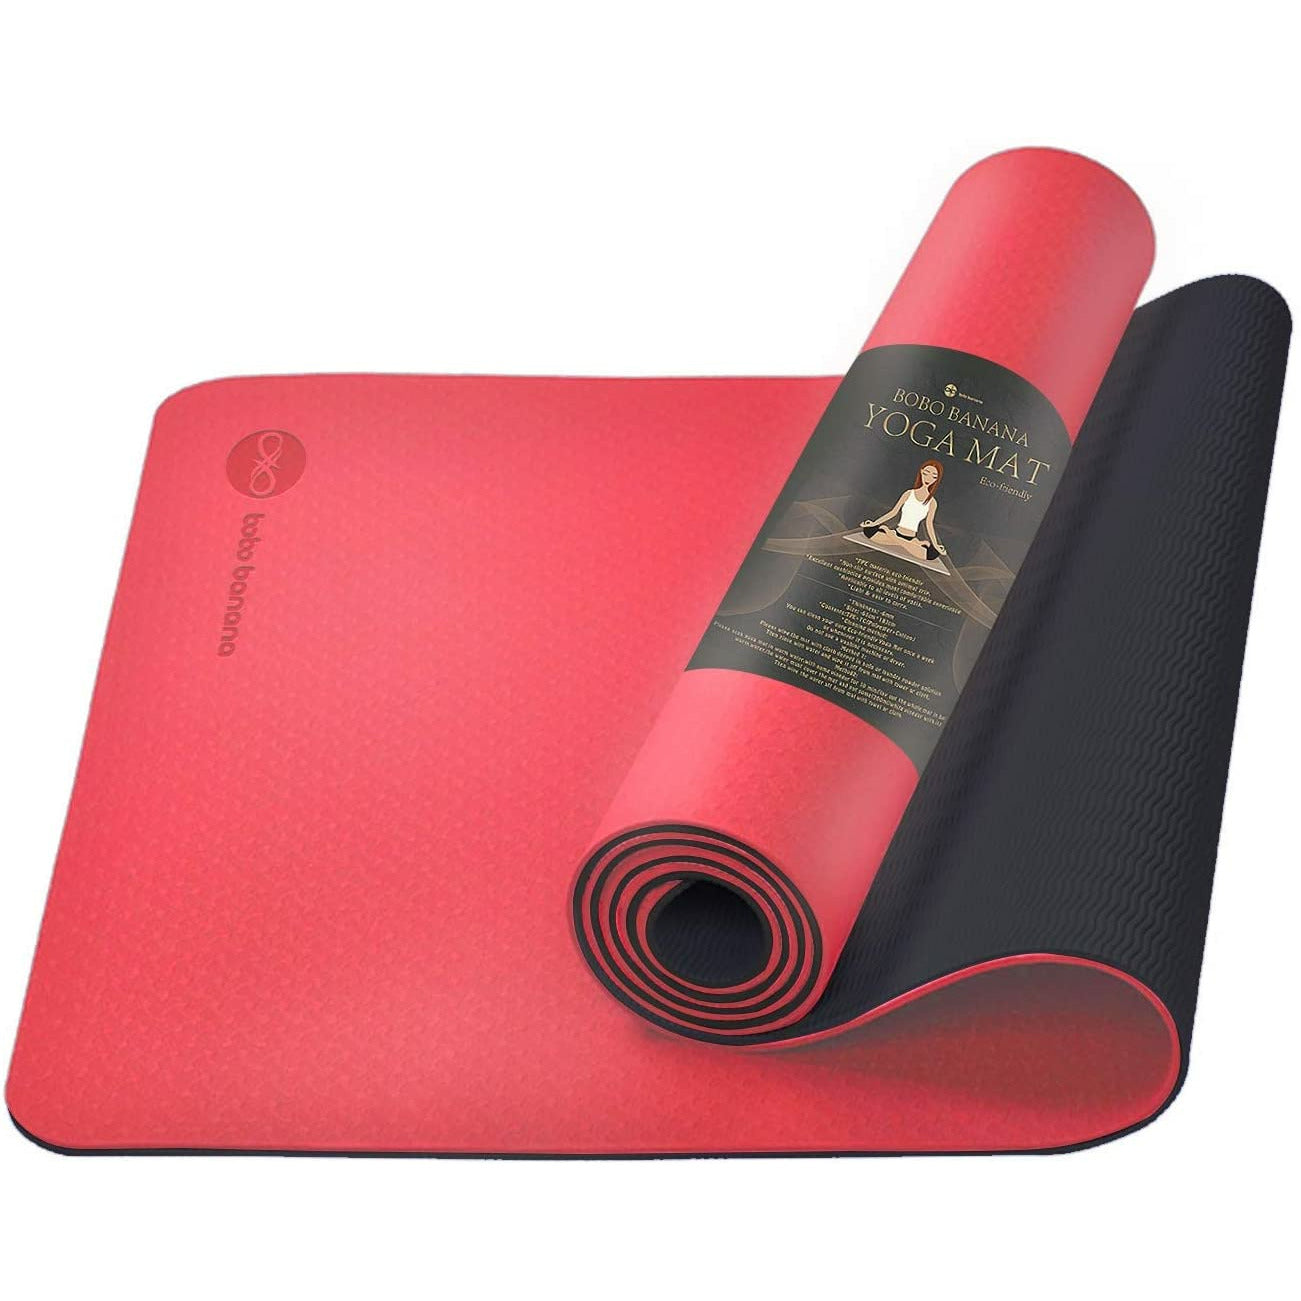 Amazing Bobo Banana Yoga Mat in red and black colors. 